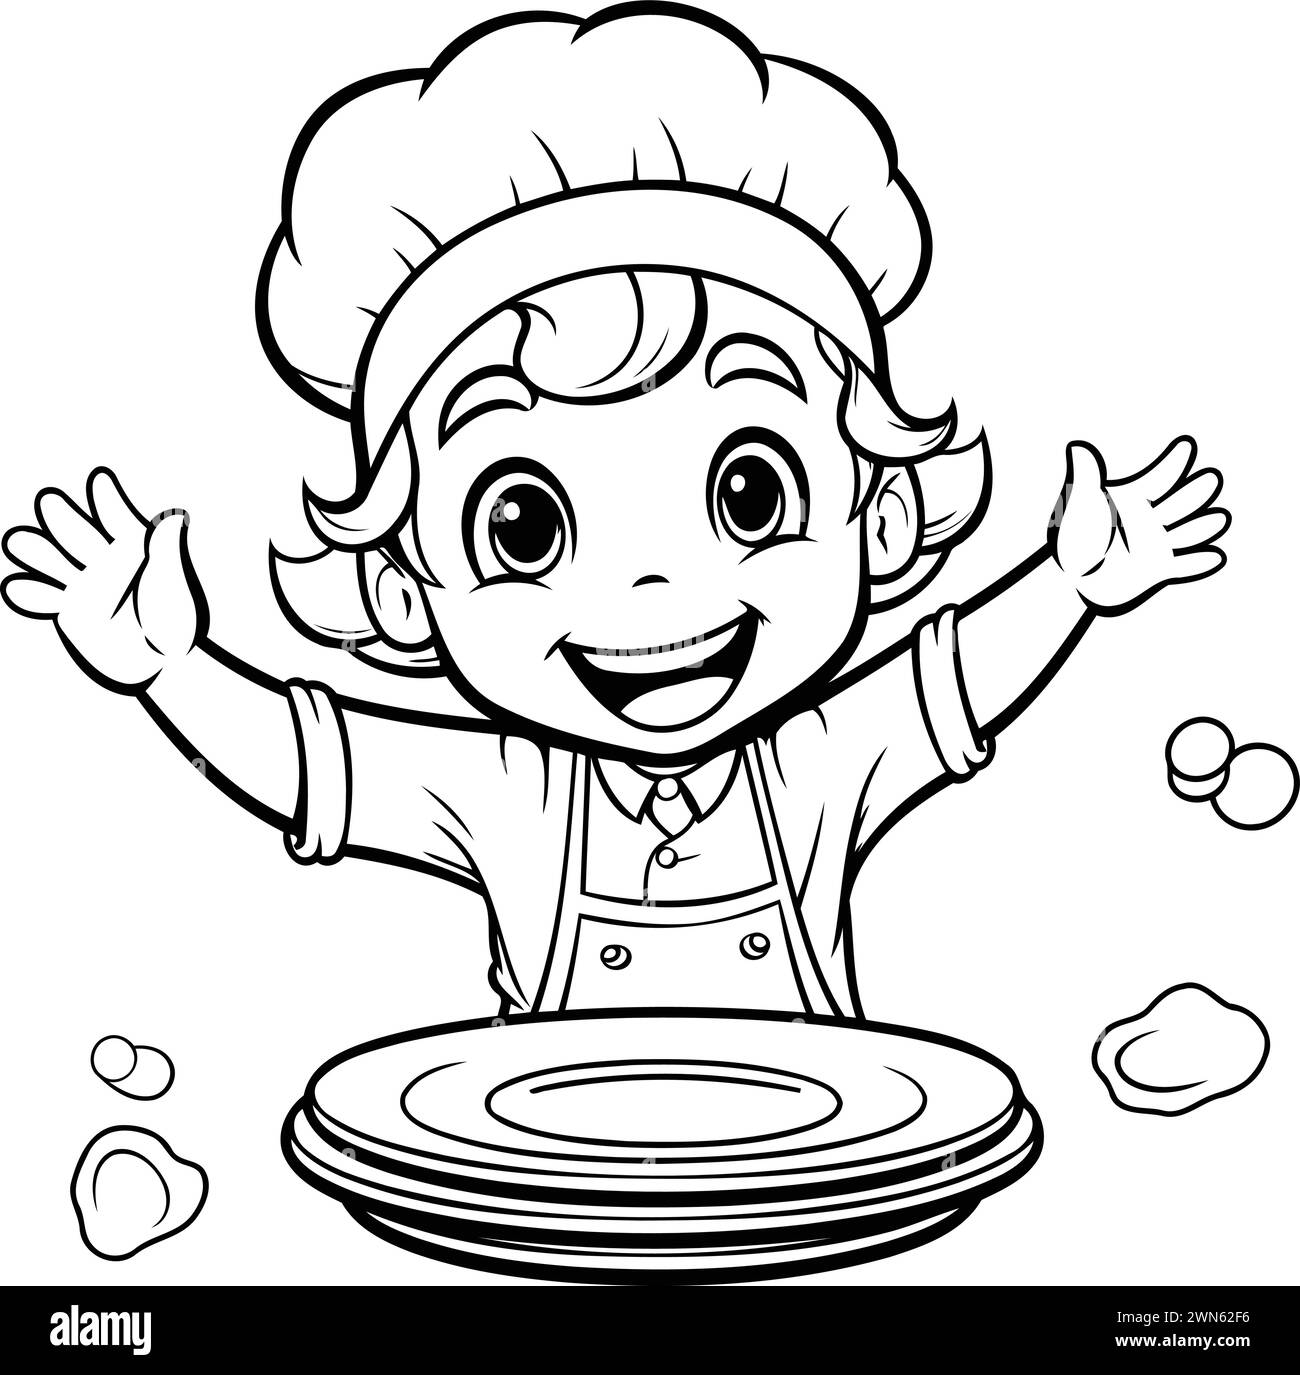 Black and White Cartoon Illustration of Little Chef Boy with Plate for Coloring Book Stock Vector